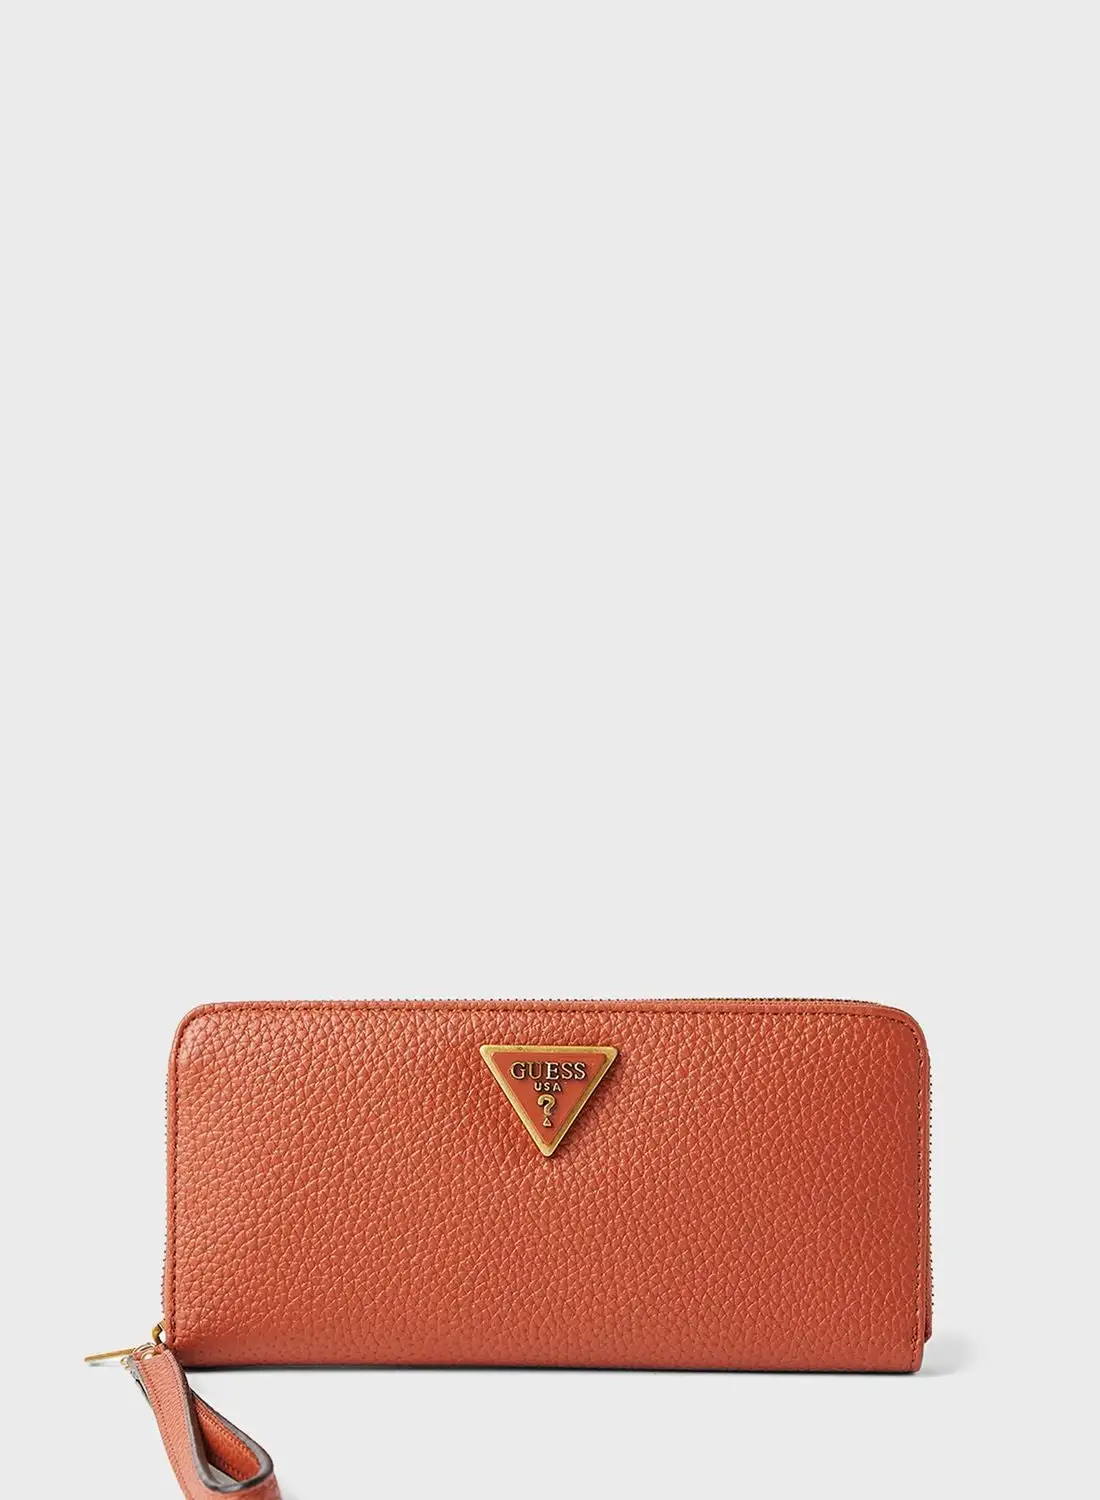 GUESS Downtown Chic Zip Around Wallet